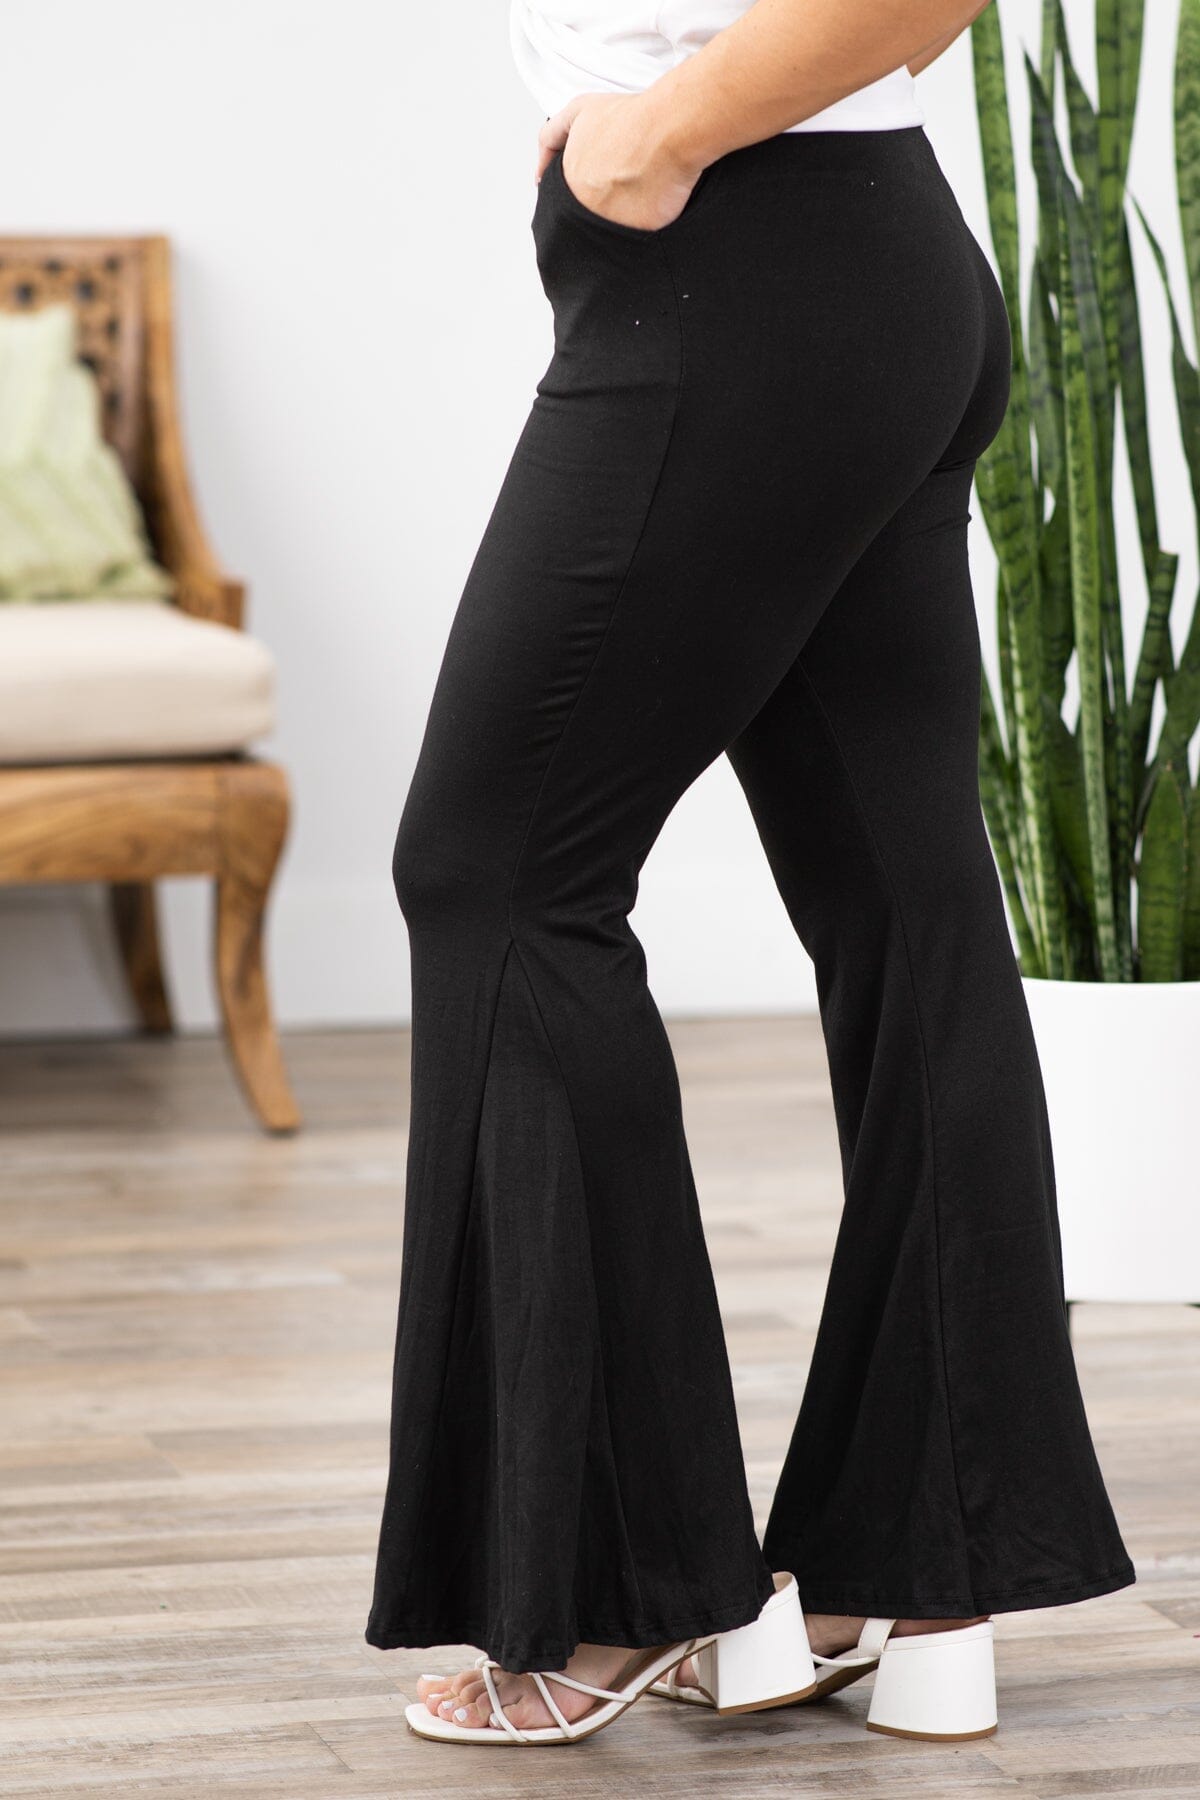 Black Flare Pull On Pants - Filly Flair